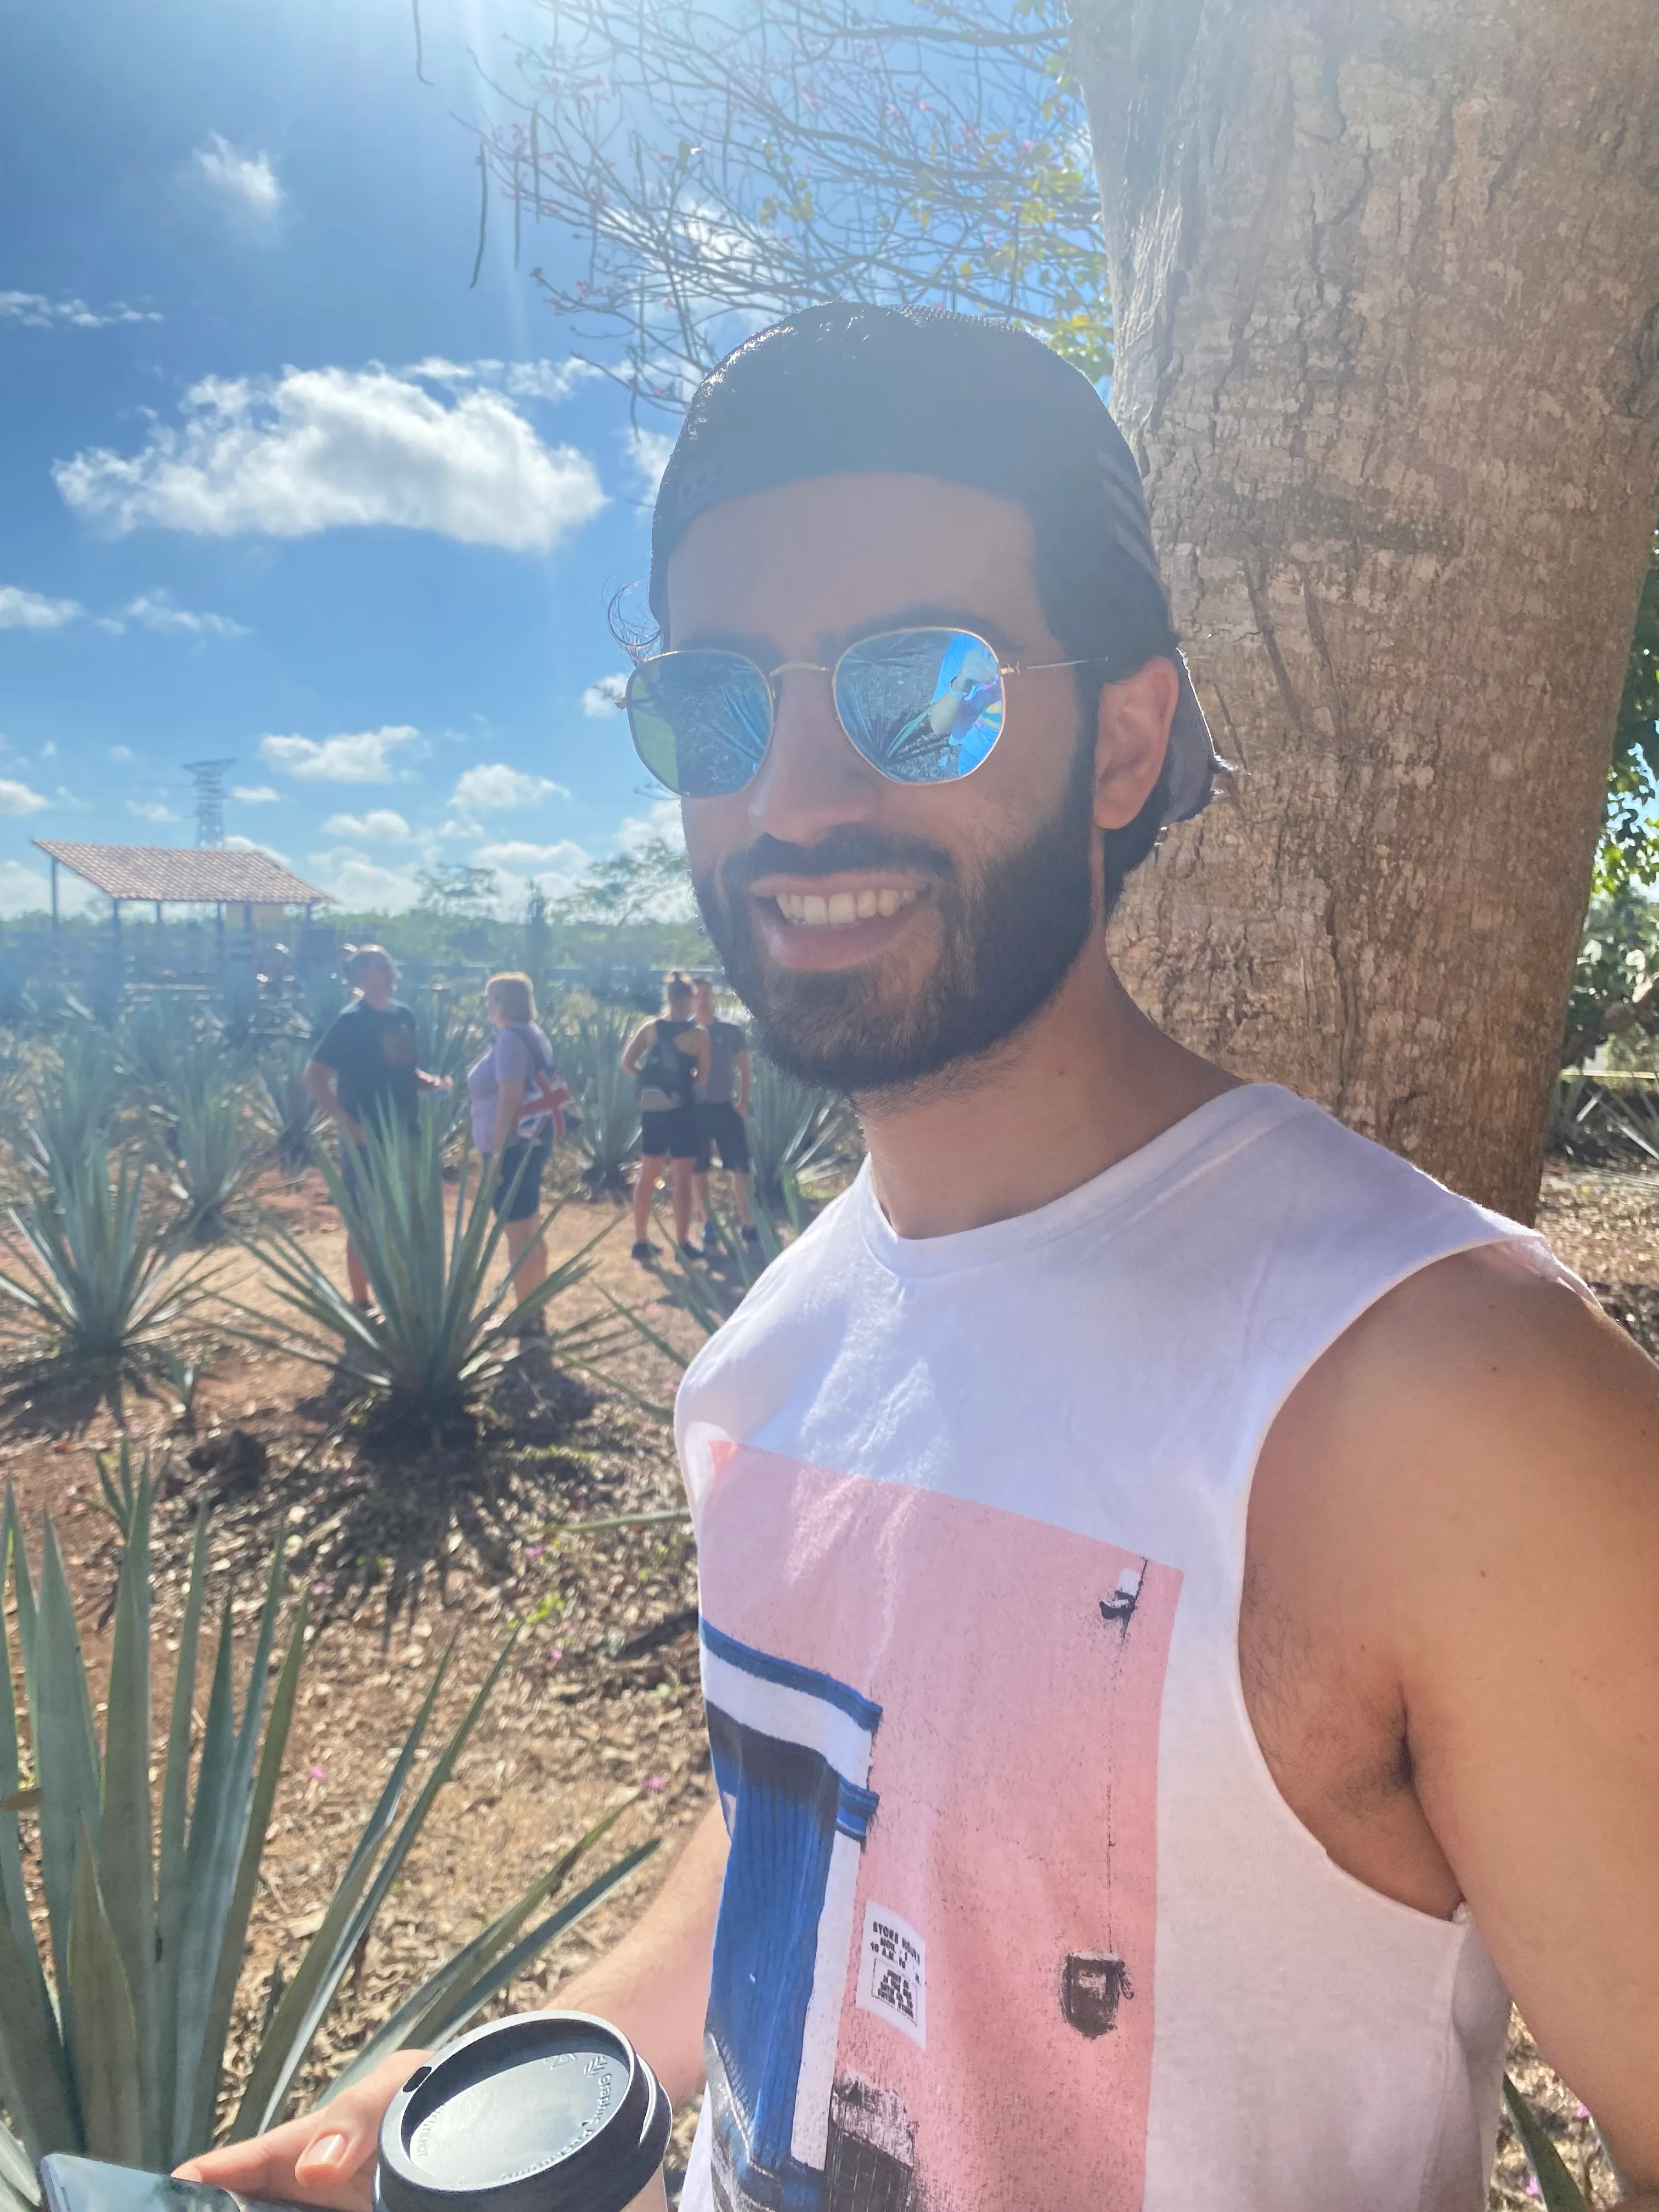 Co-founder Harout smiling in Mexico